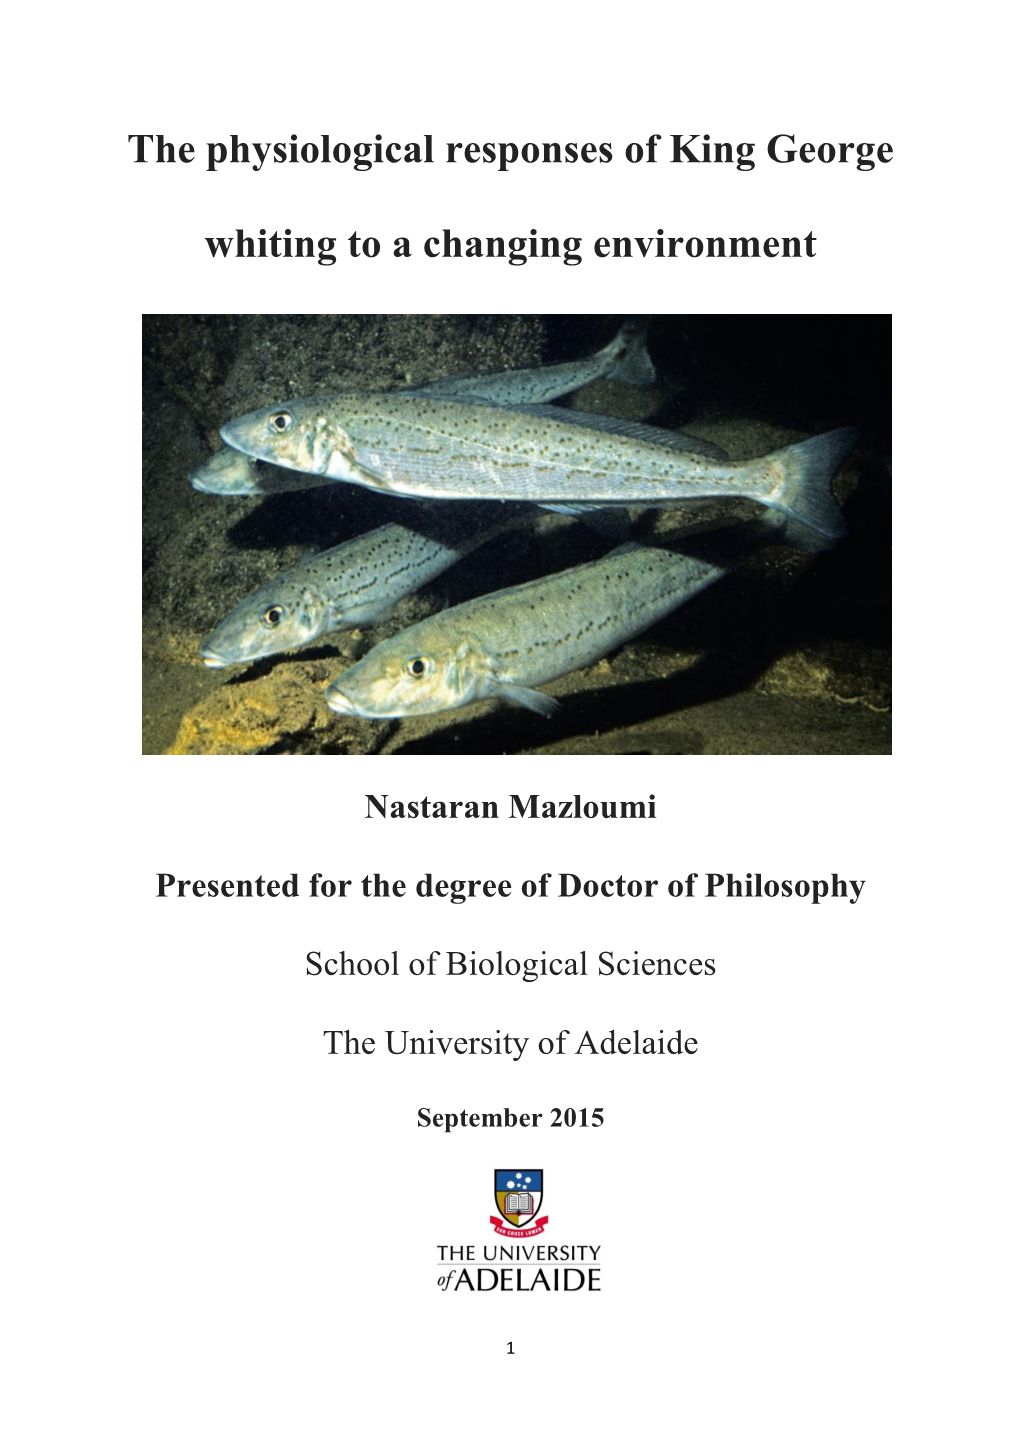 The Physiological Responses of King George Whiting to a Changing